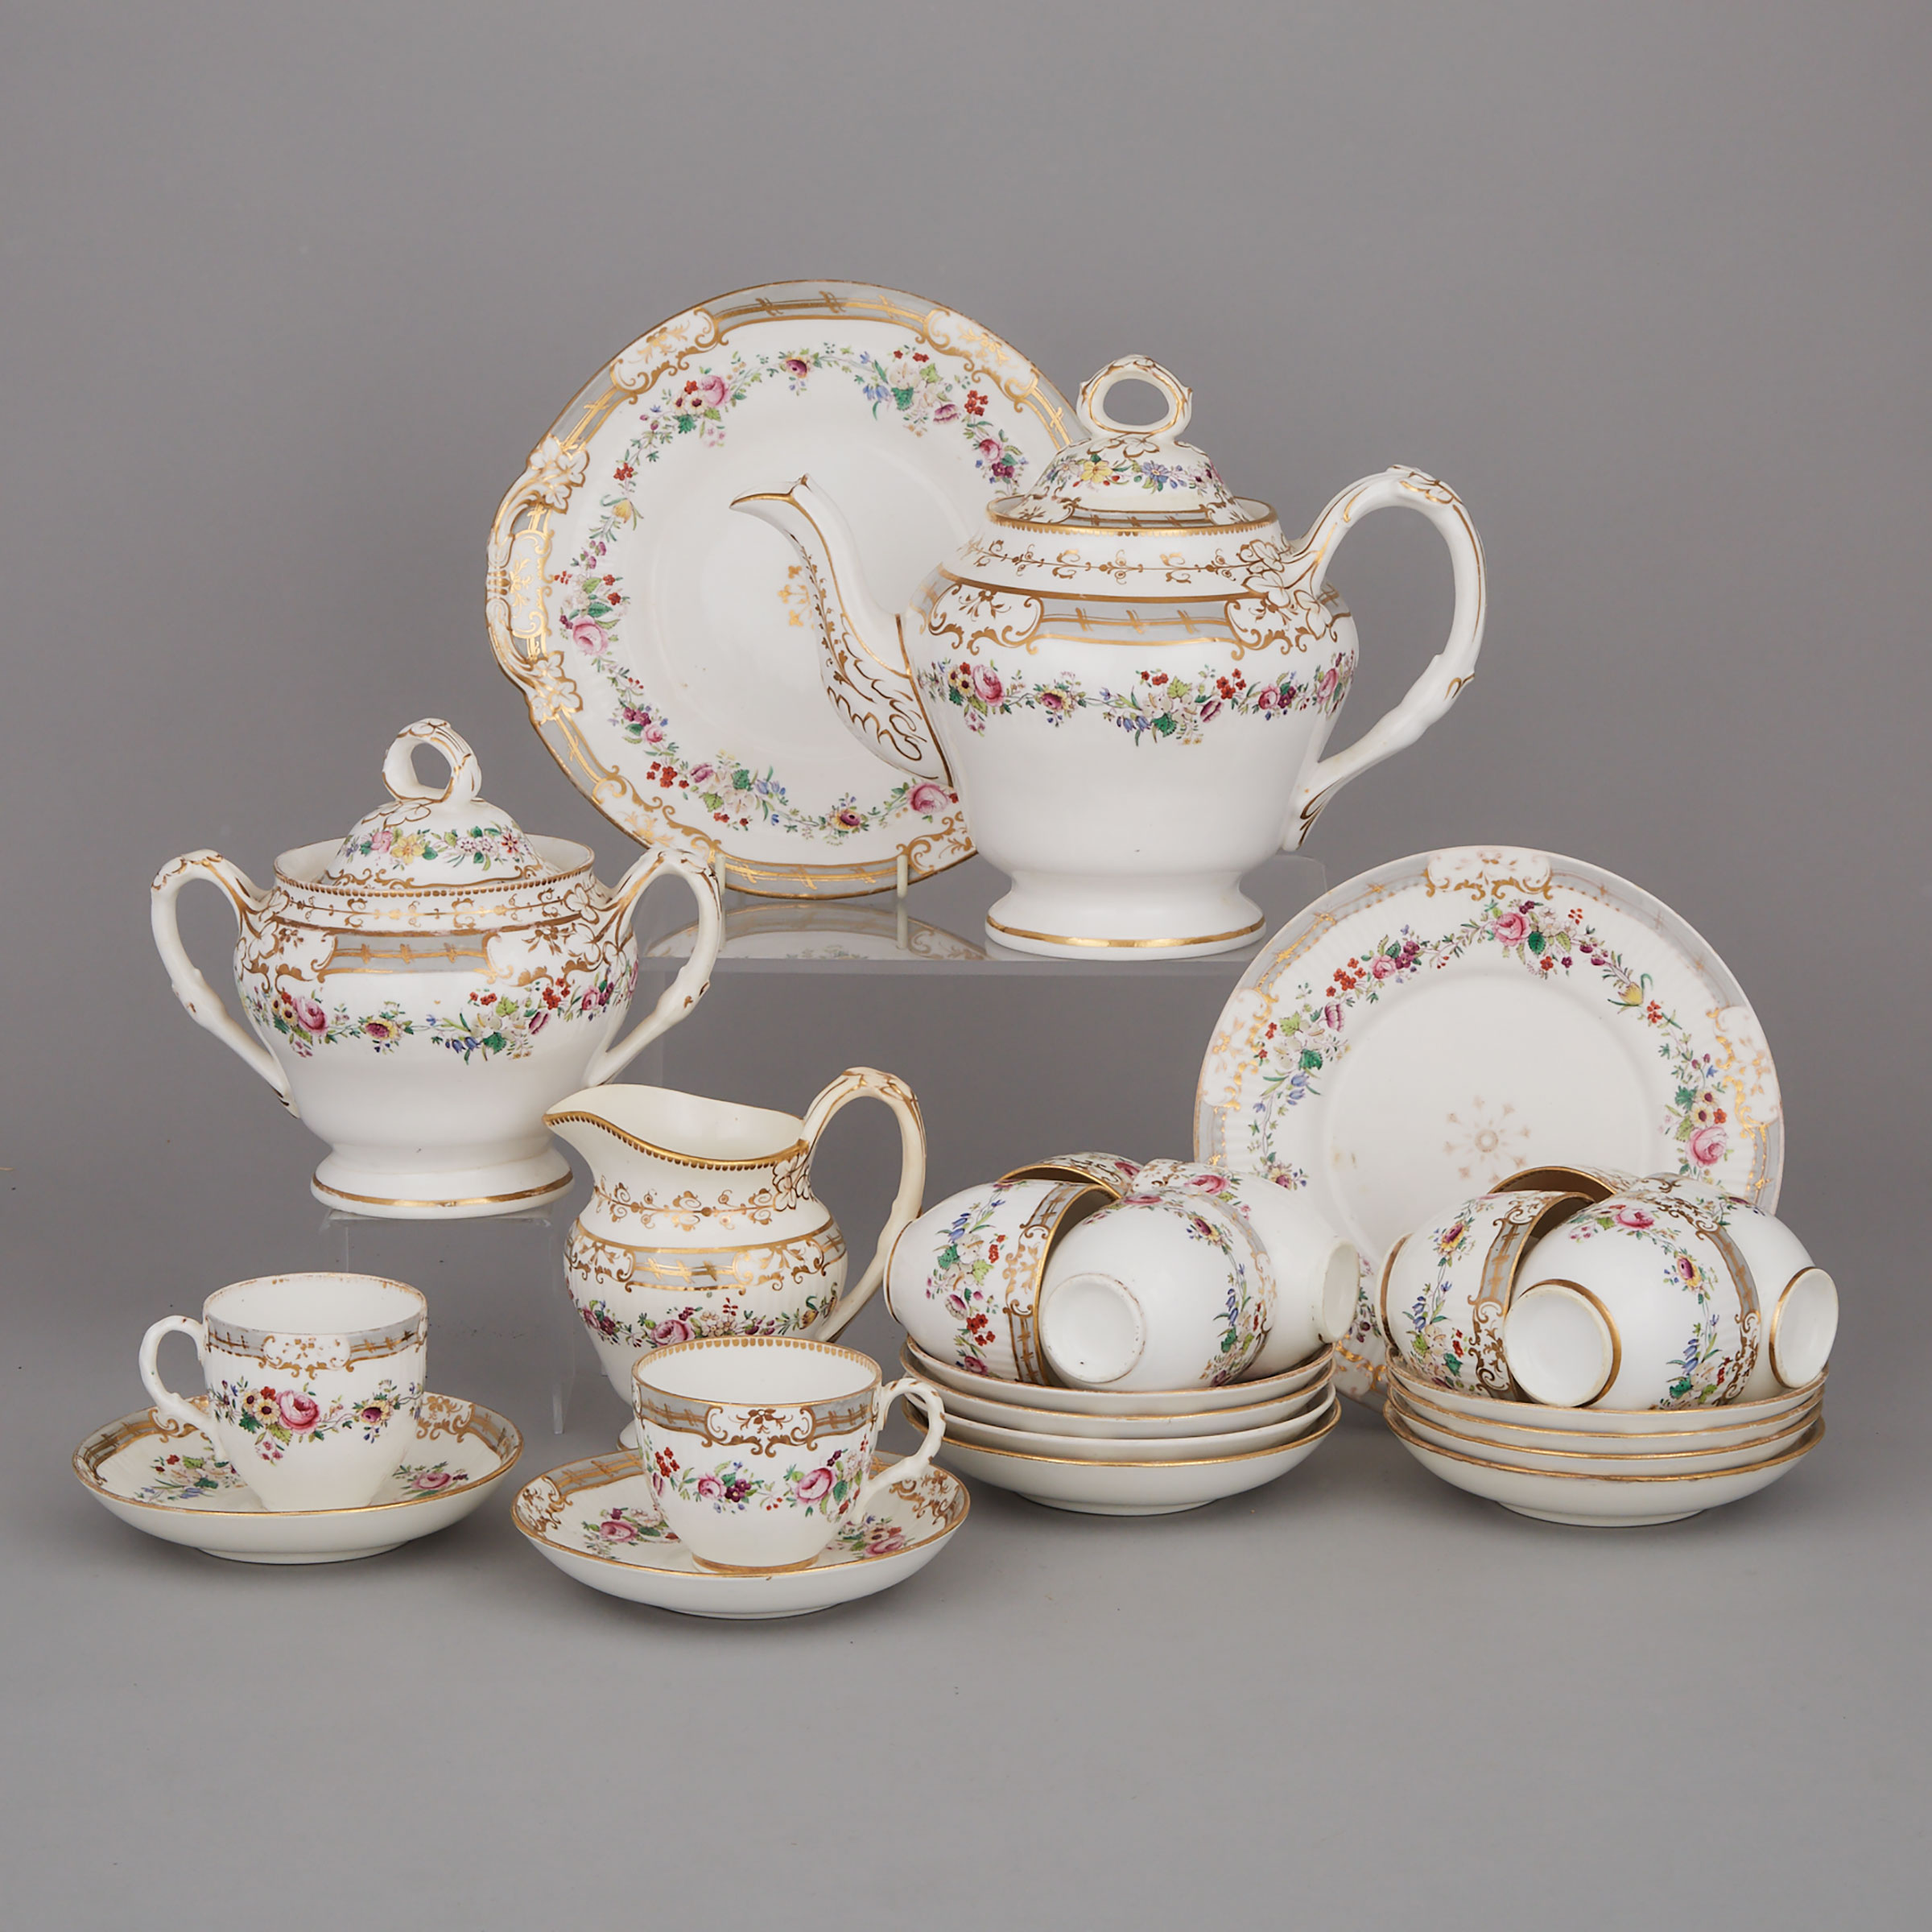 English Porcelain Grey and Gilt Ground Floral Decorated Tea Service, mid-19th century